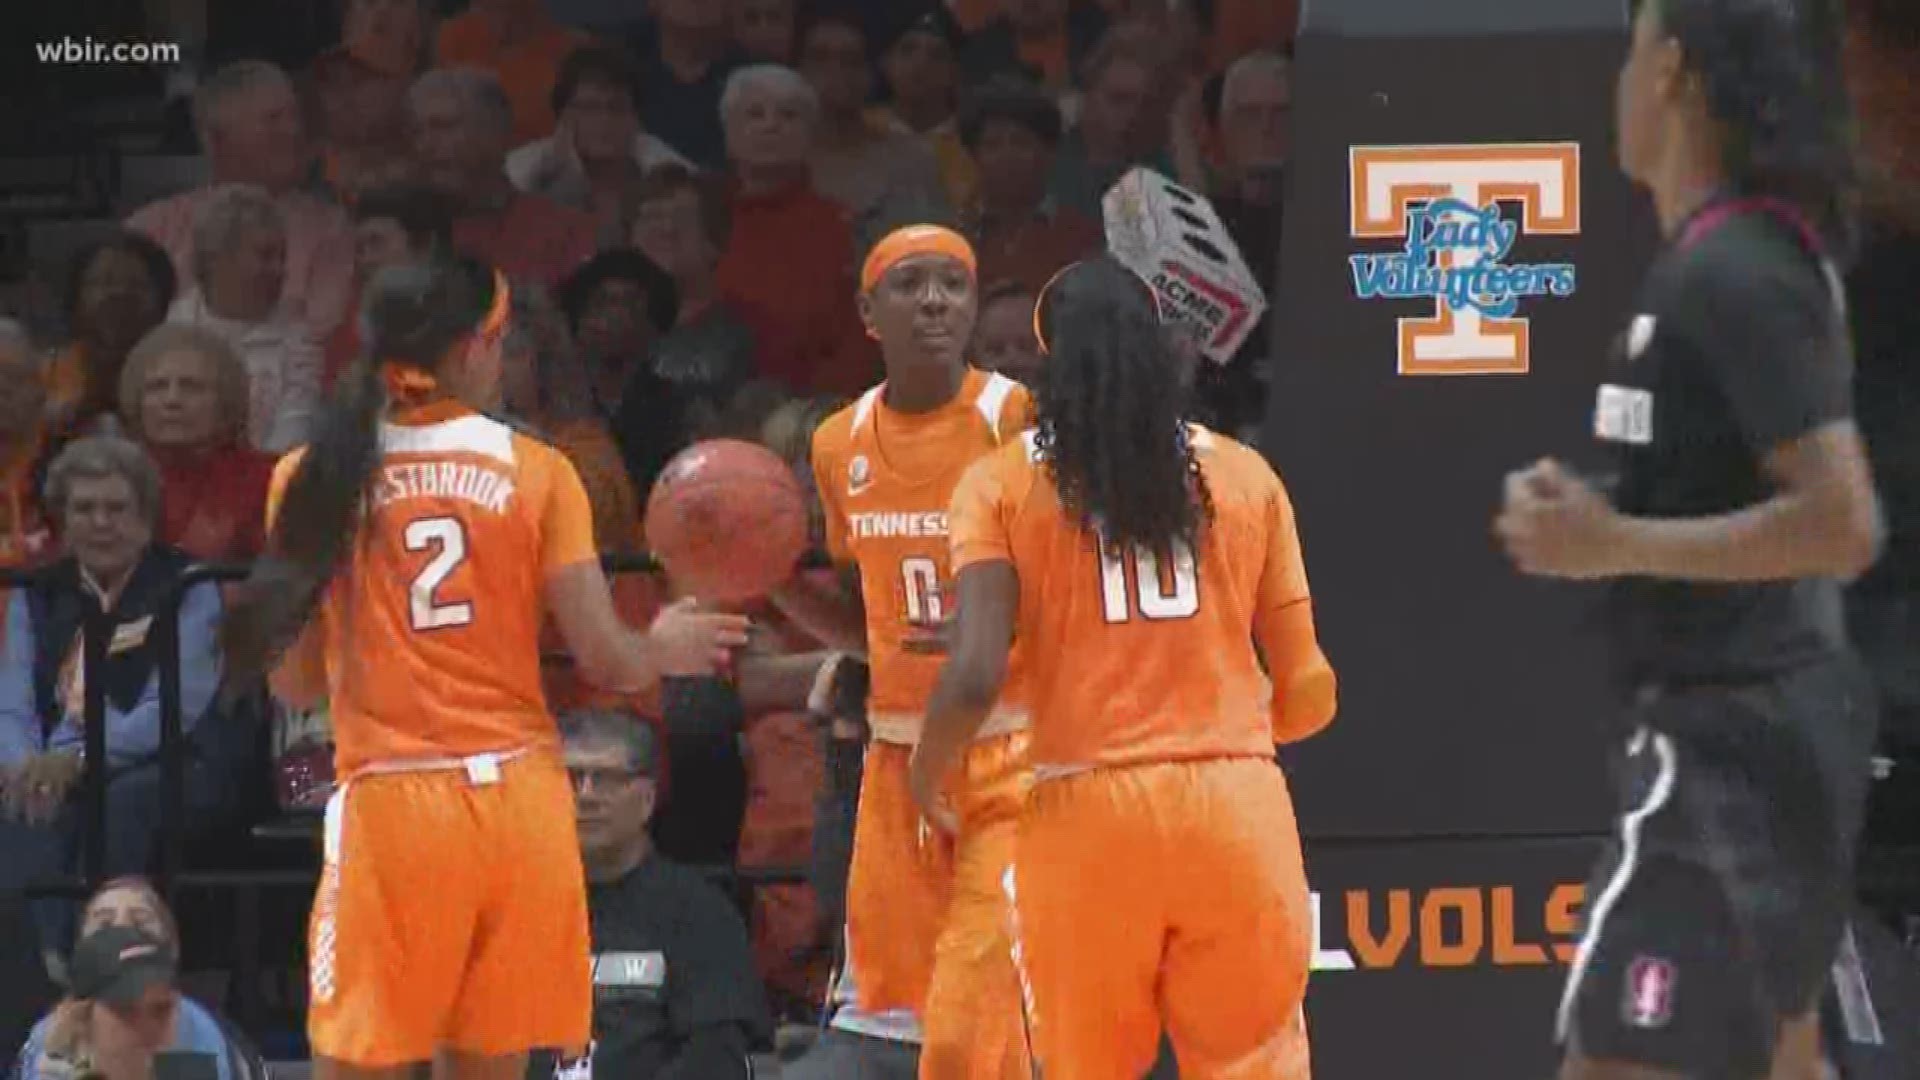 The Lady Vols' perfect season comes to an end with a 95-85 loss to Stanford.